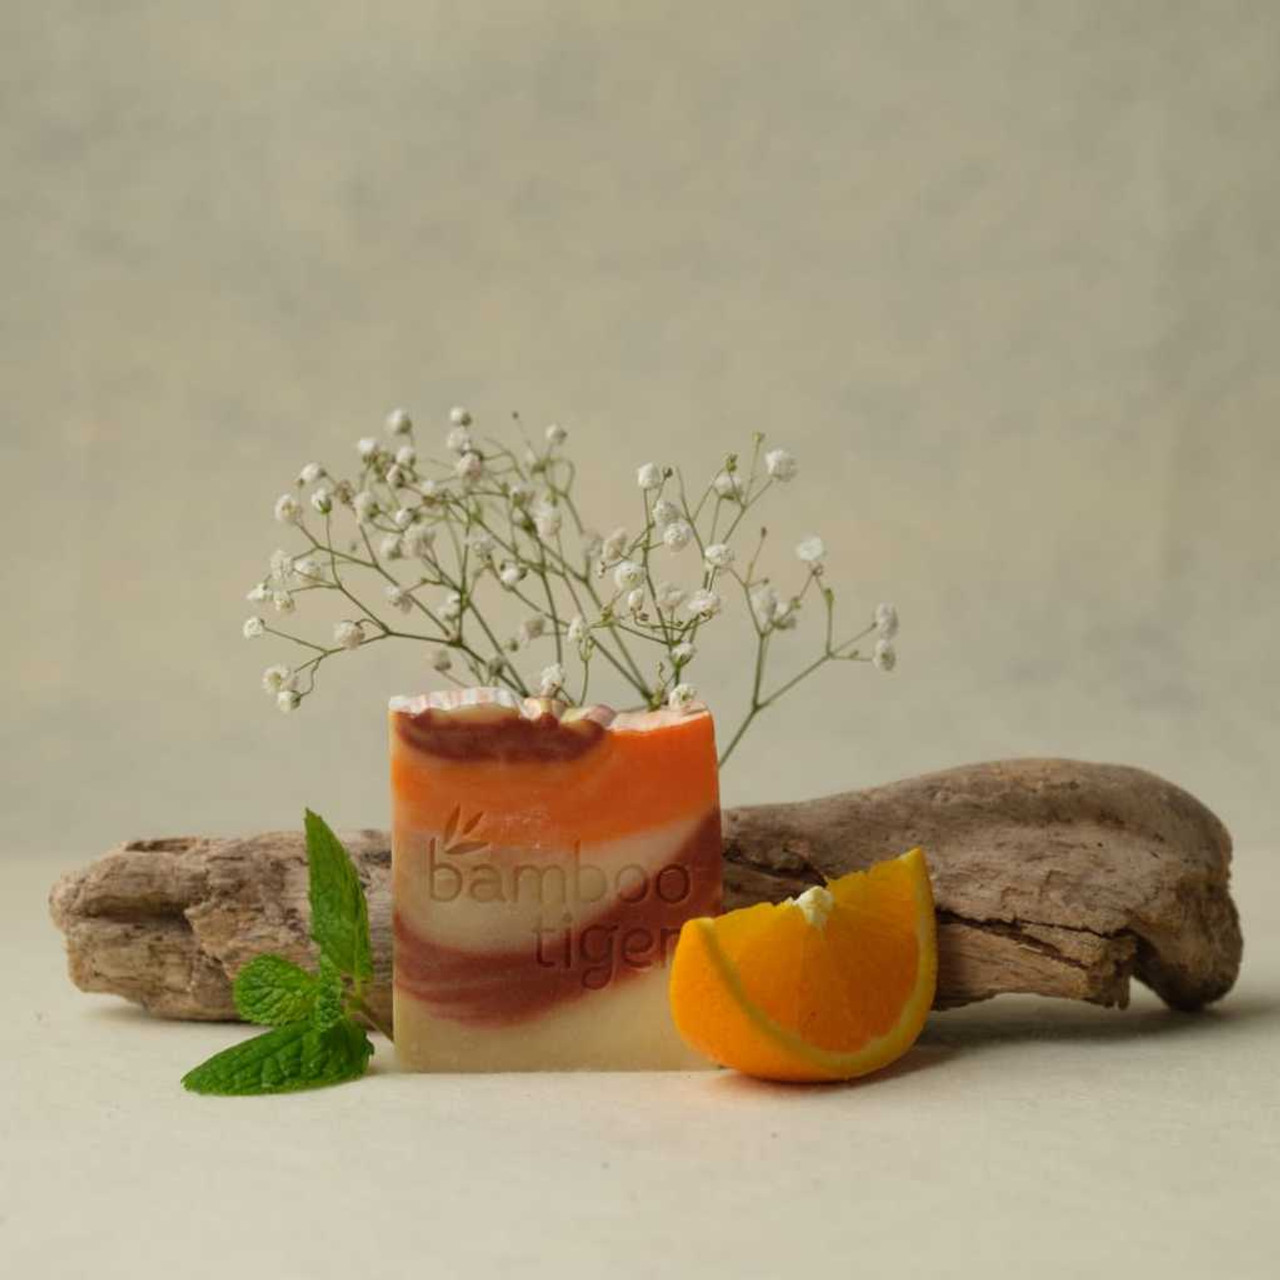 Bamboo Tiger Soap Air Orange & Peppermint, 135gr